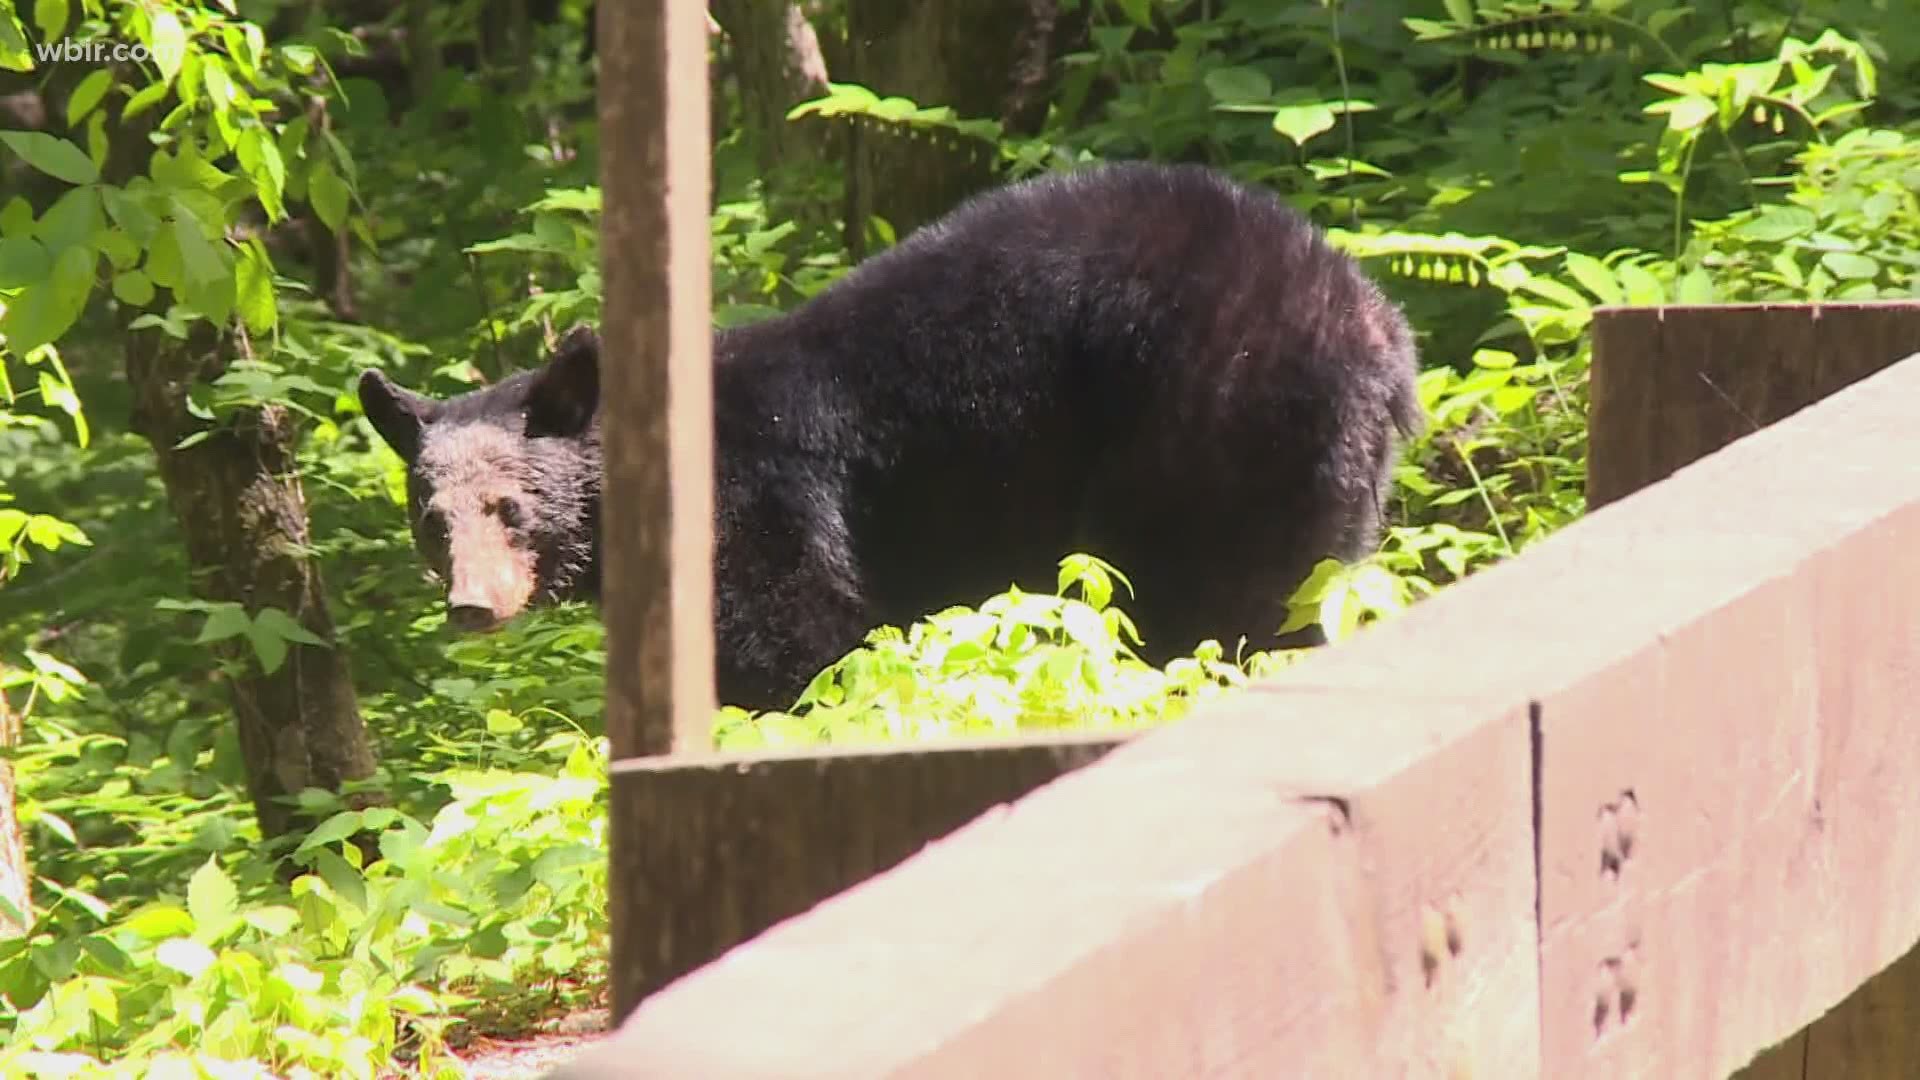 Don't feed the bears: it's a message repeated again and again in the Great Smoky Mountains National Park. If you're caught doing it, you could face fines and prison.